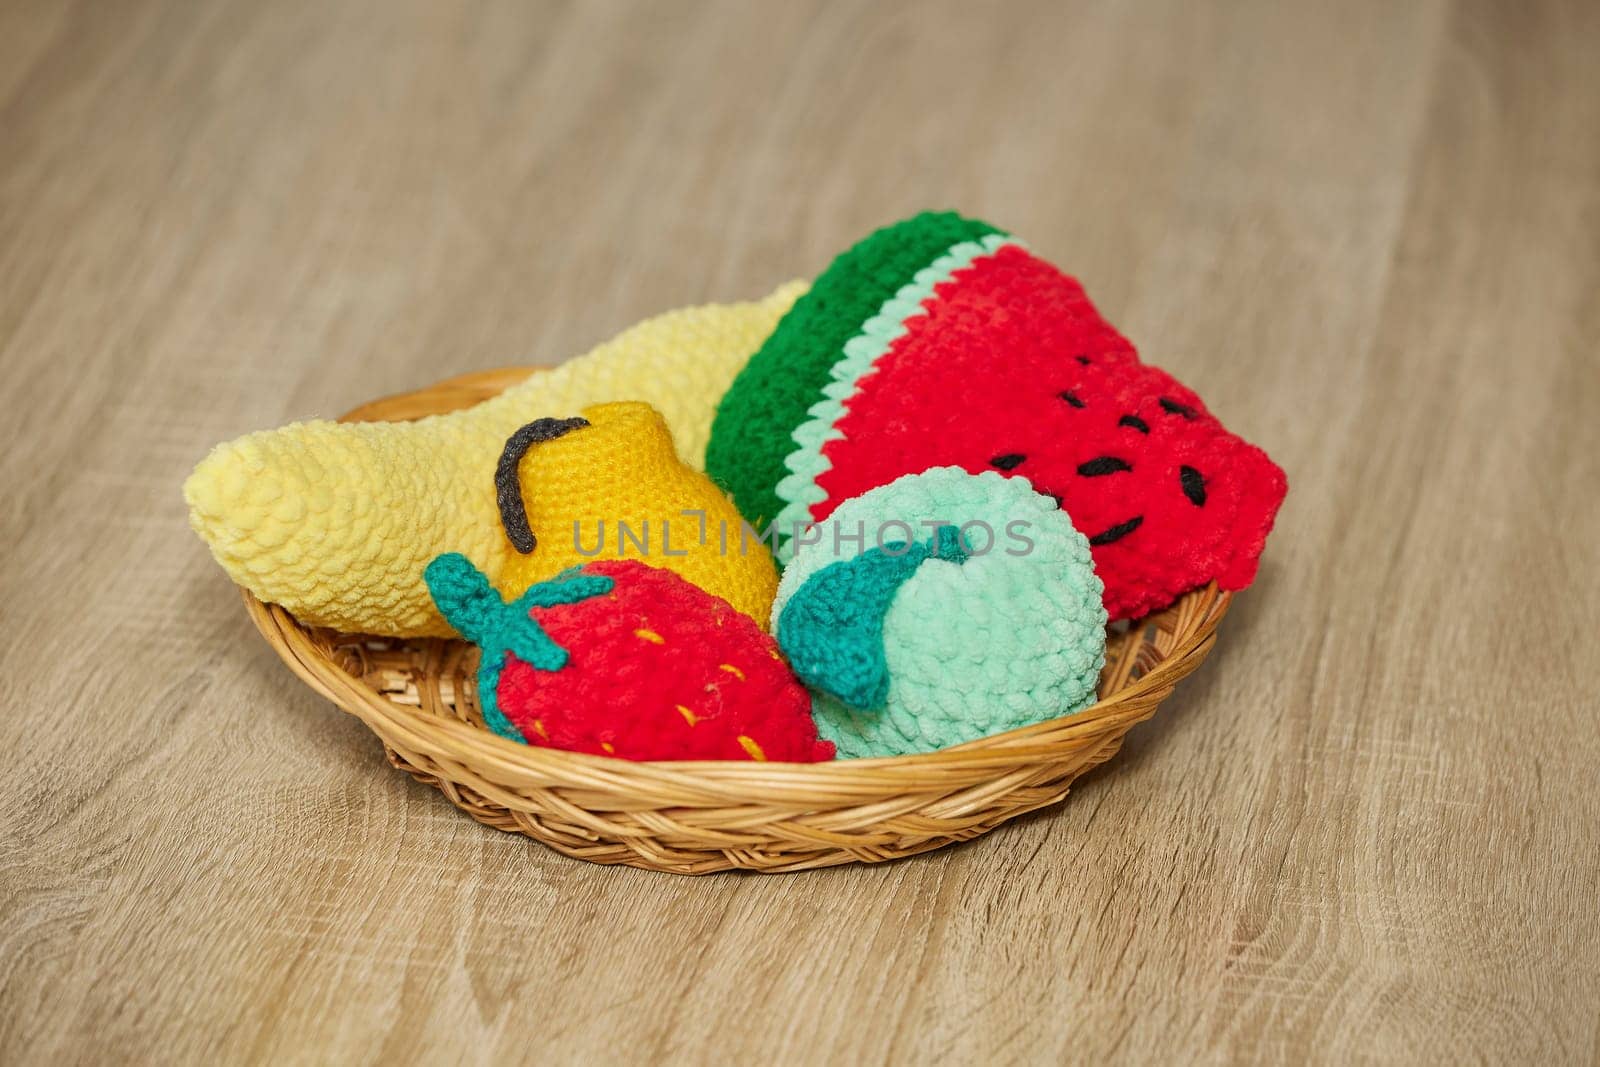 Cute knitted fruits toys on a wicker plate.